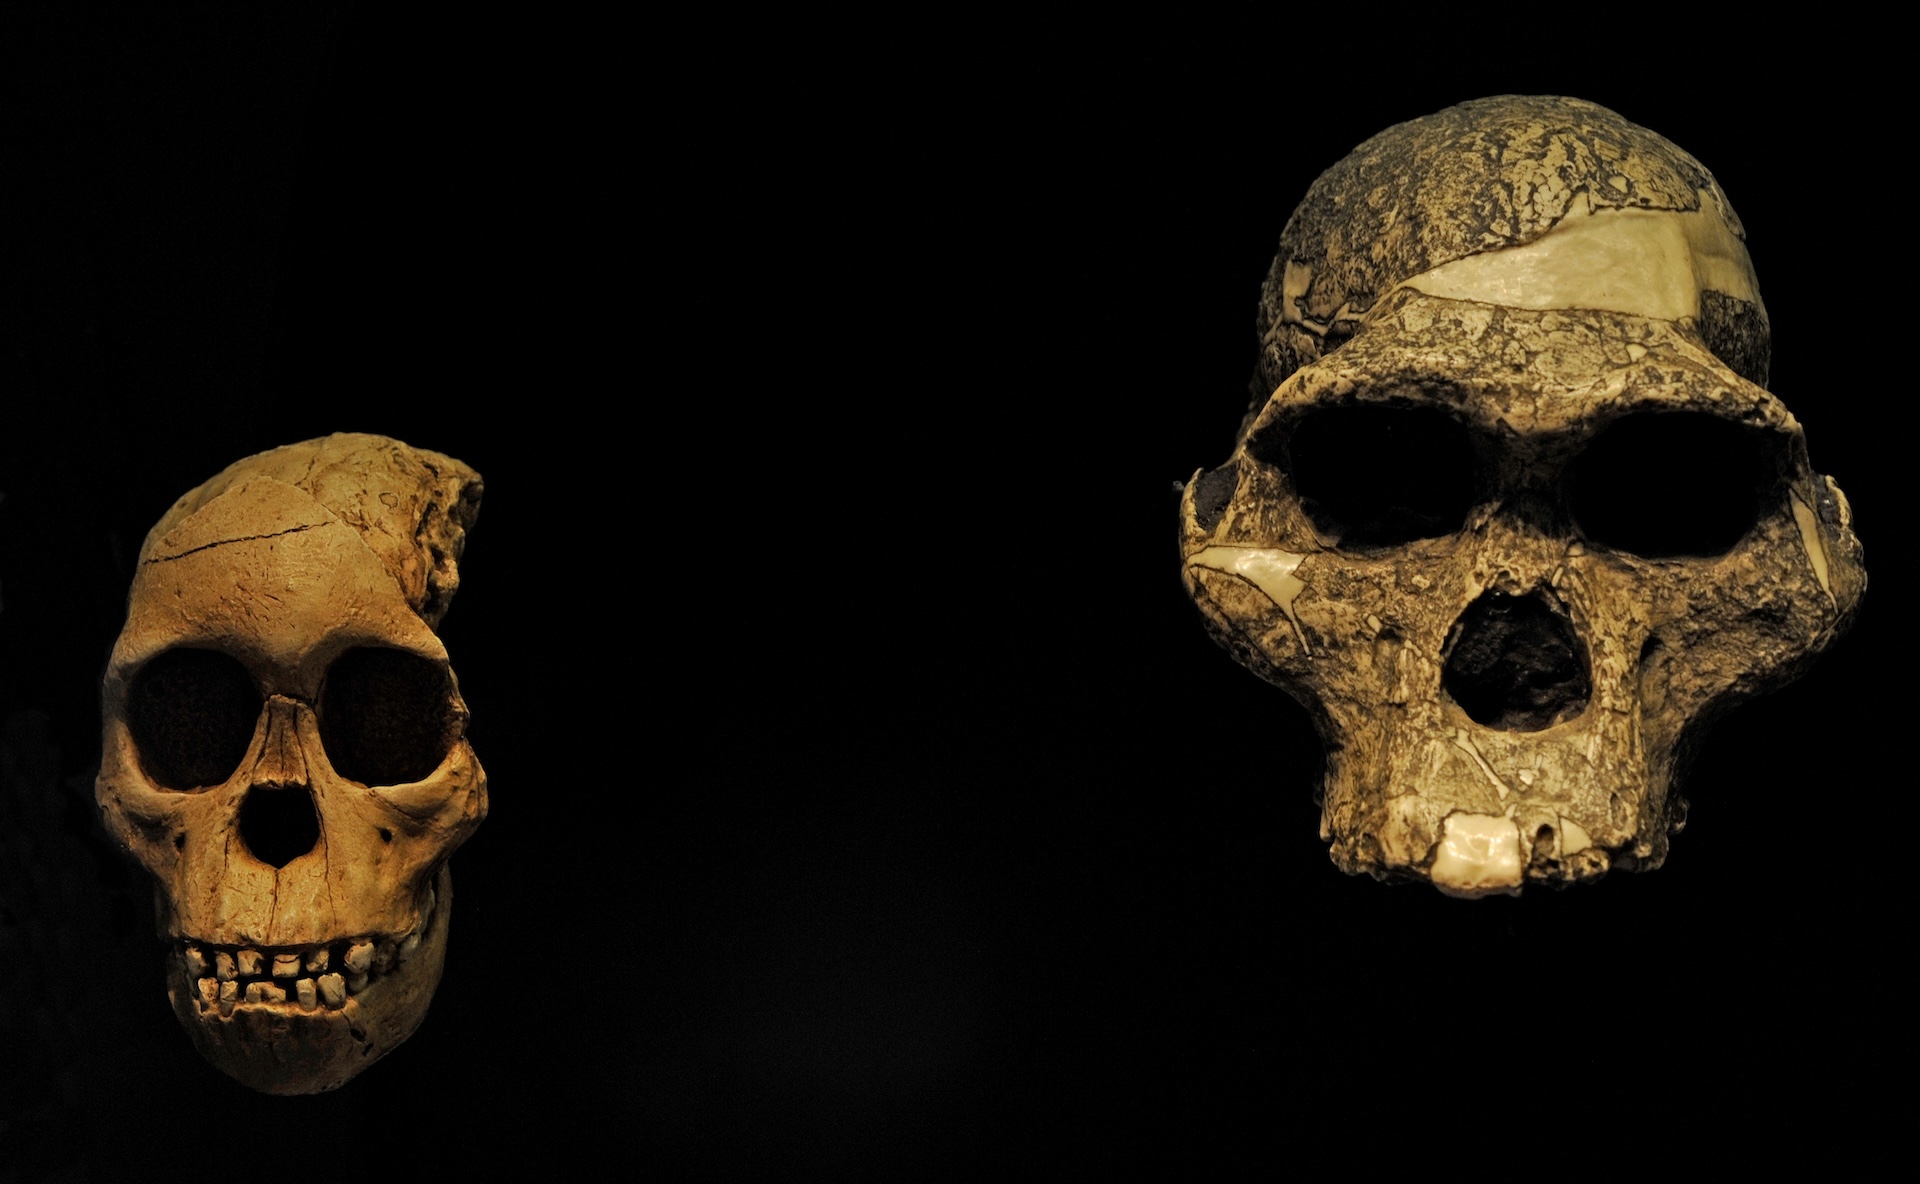 A comparison of the Taung child skull next to that of Mrs Ples, a much larger skull